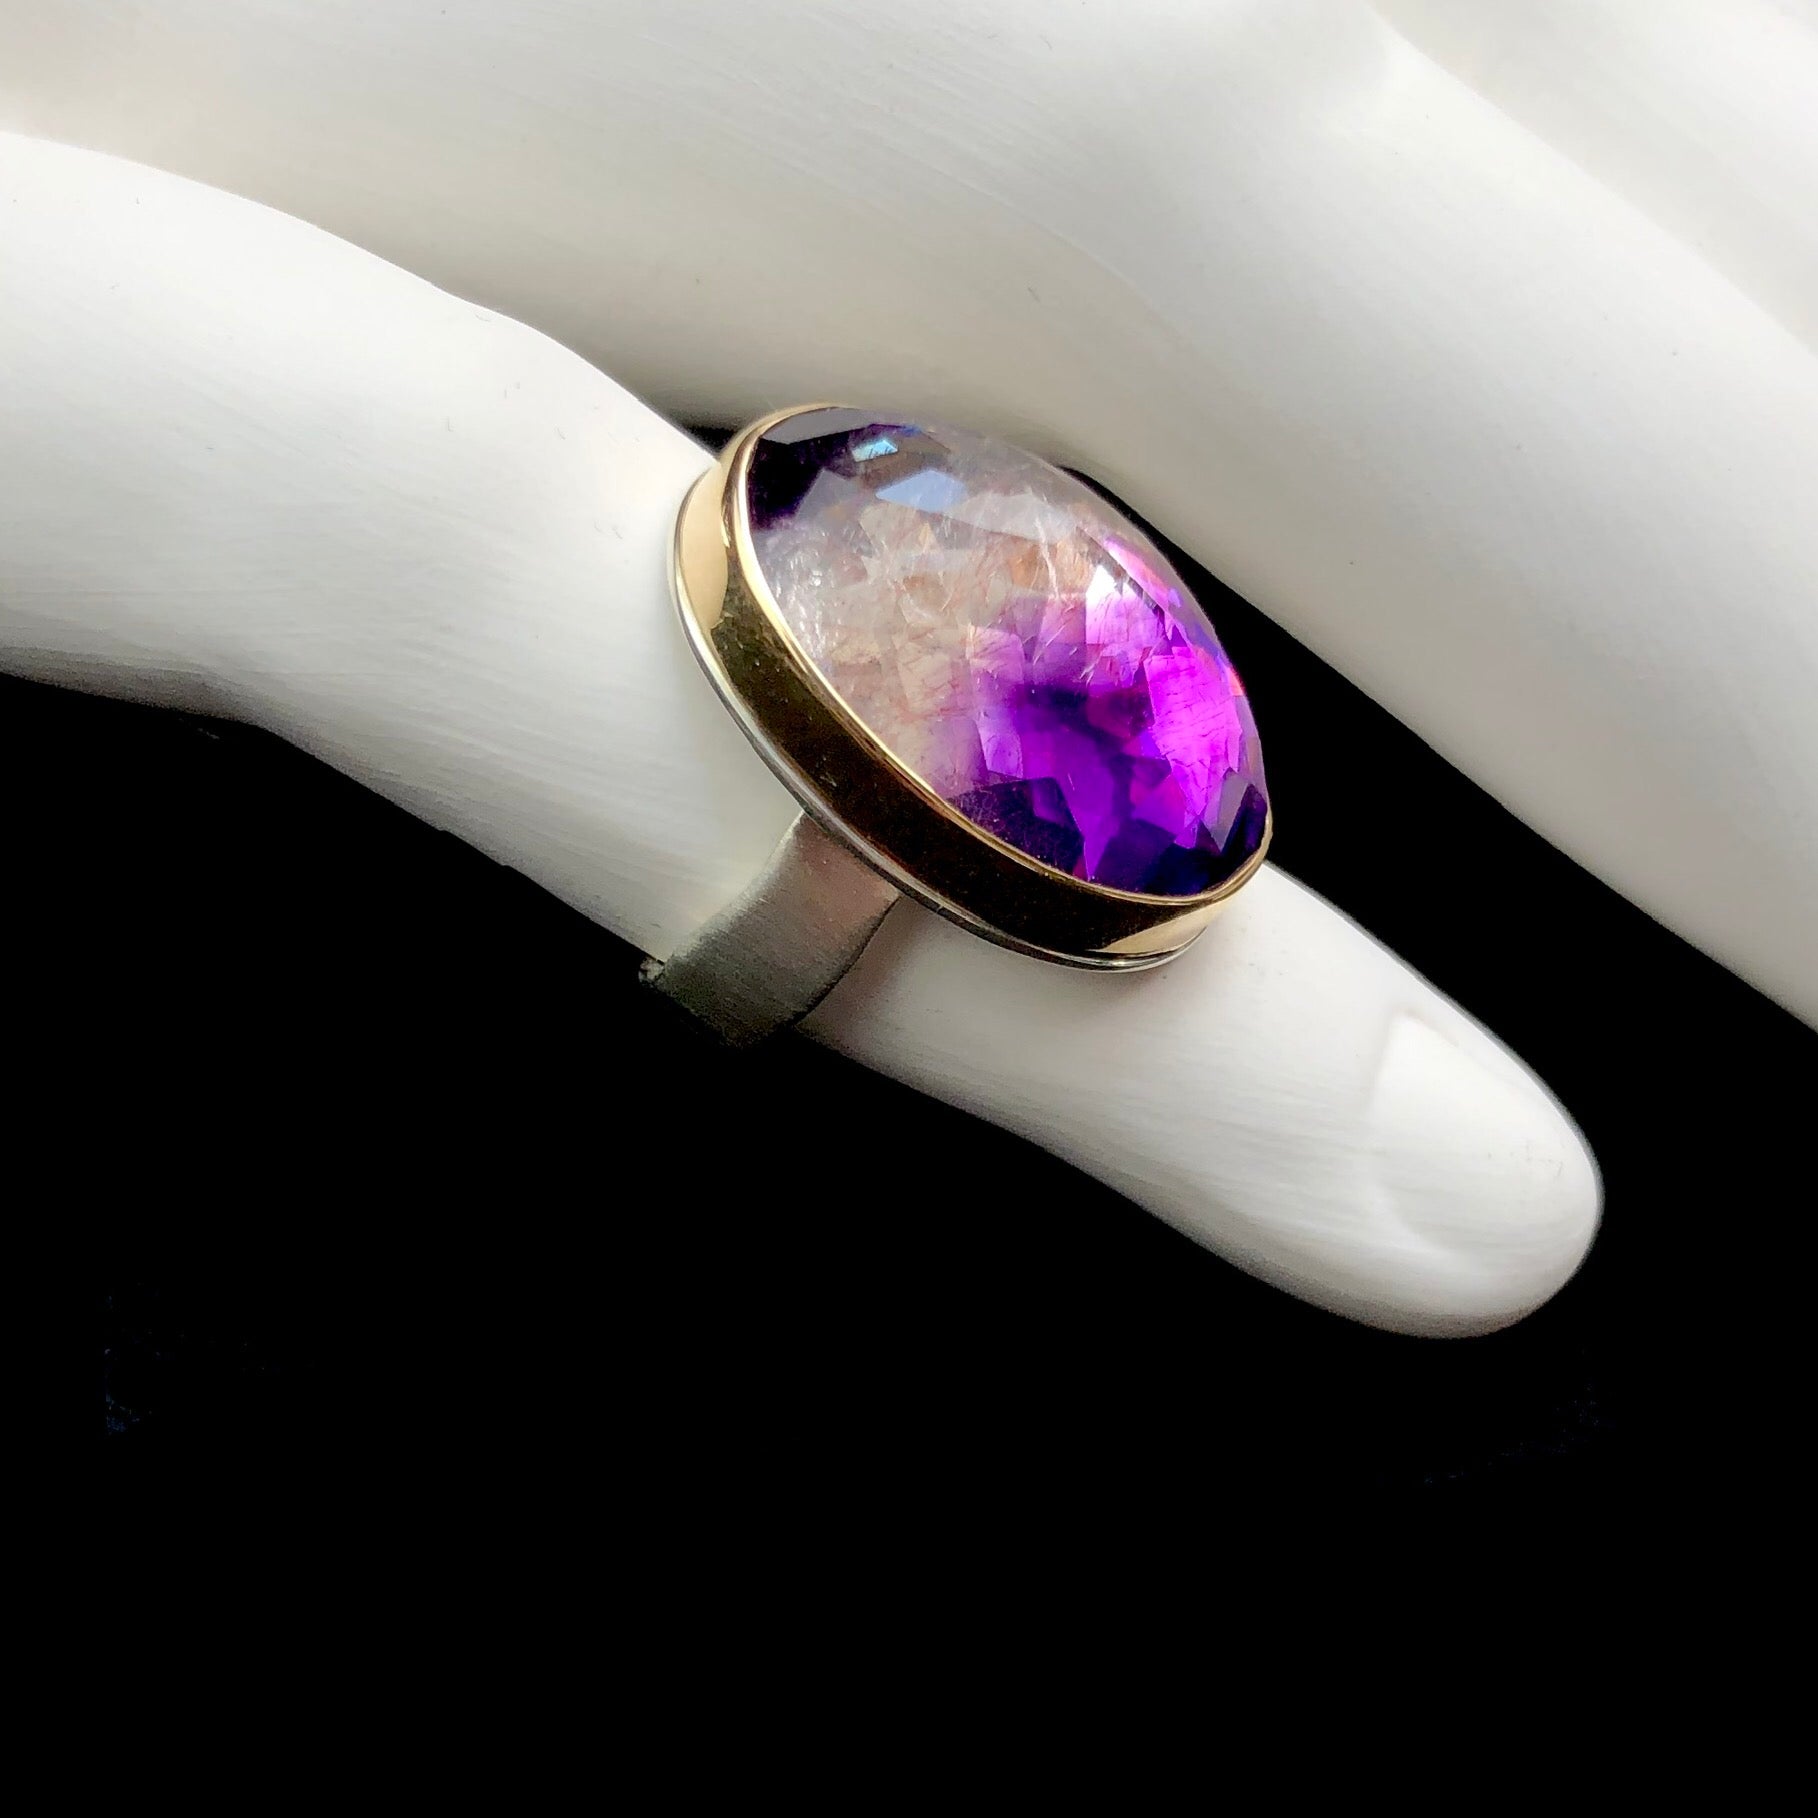 Side profile view of faceted pyramid shape of clear and purple stone ring shown on white ceramic finger